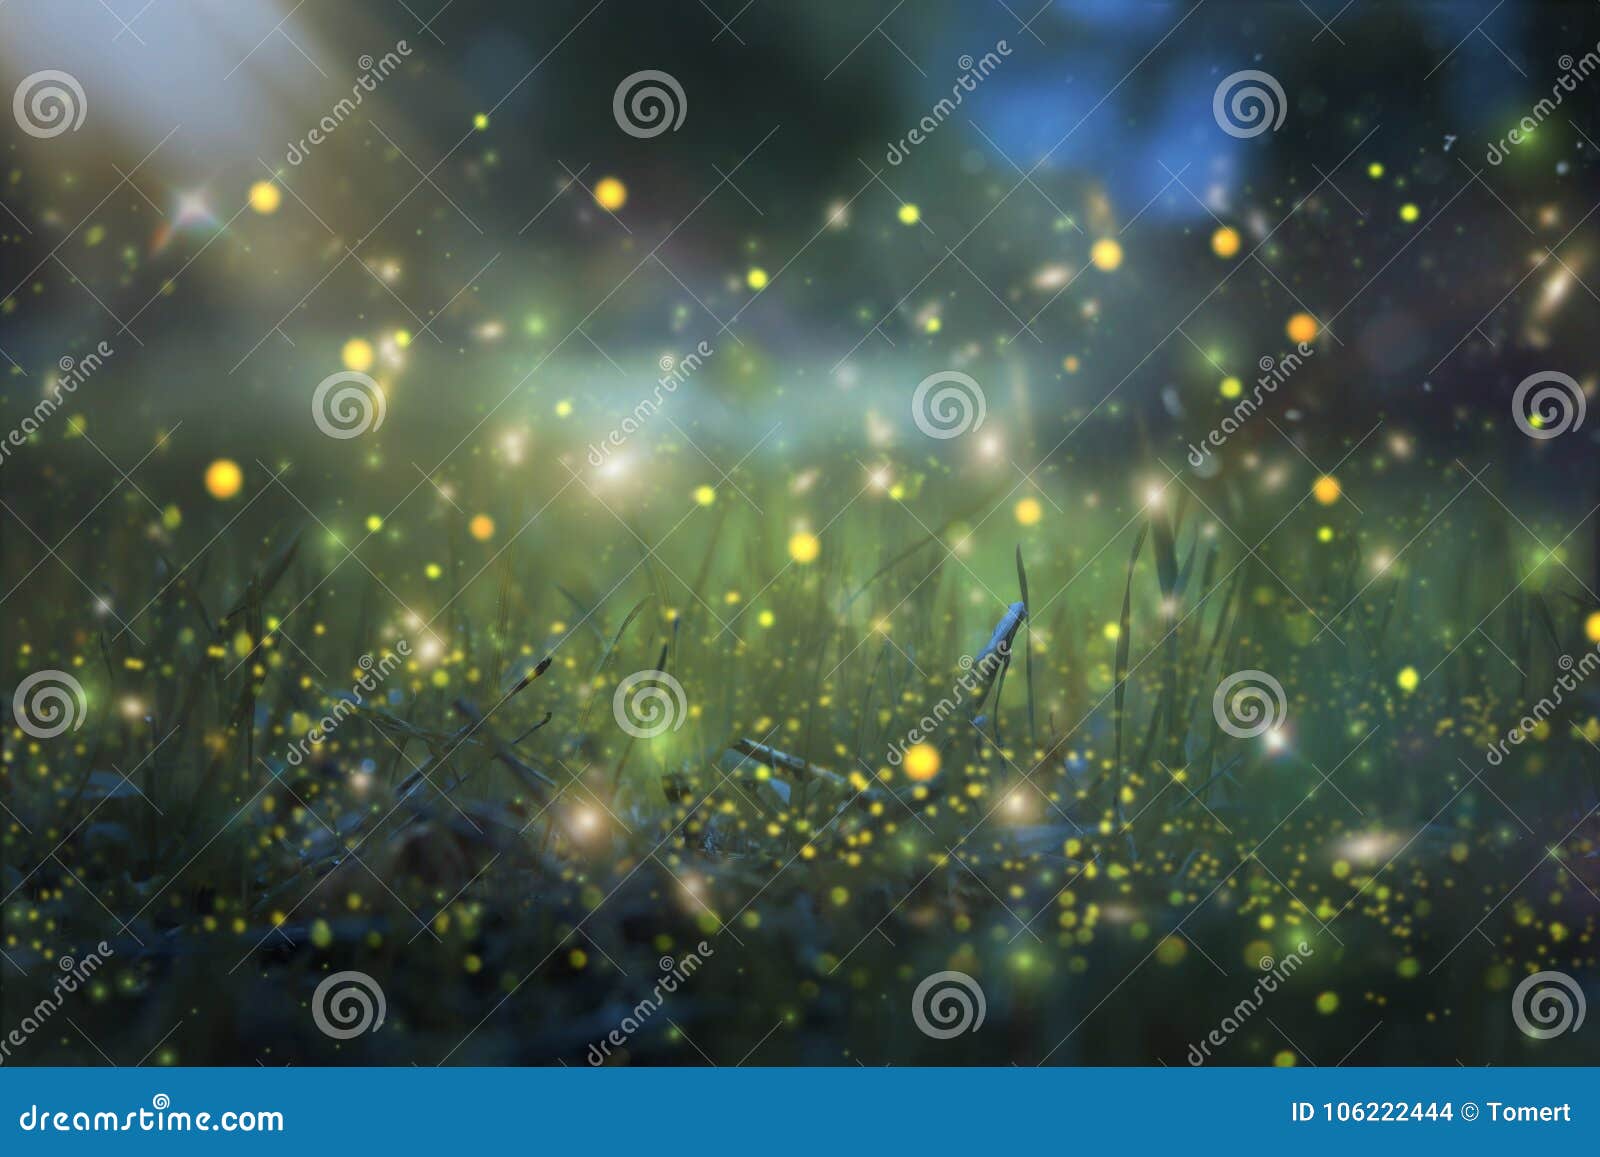 abstract and magical image of firefly flying in the night forest. fairy tale concept.